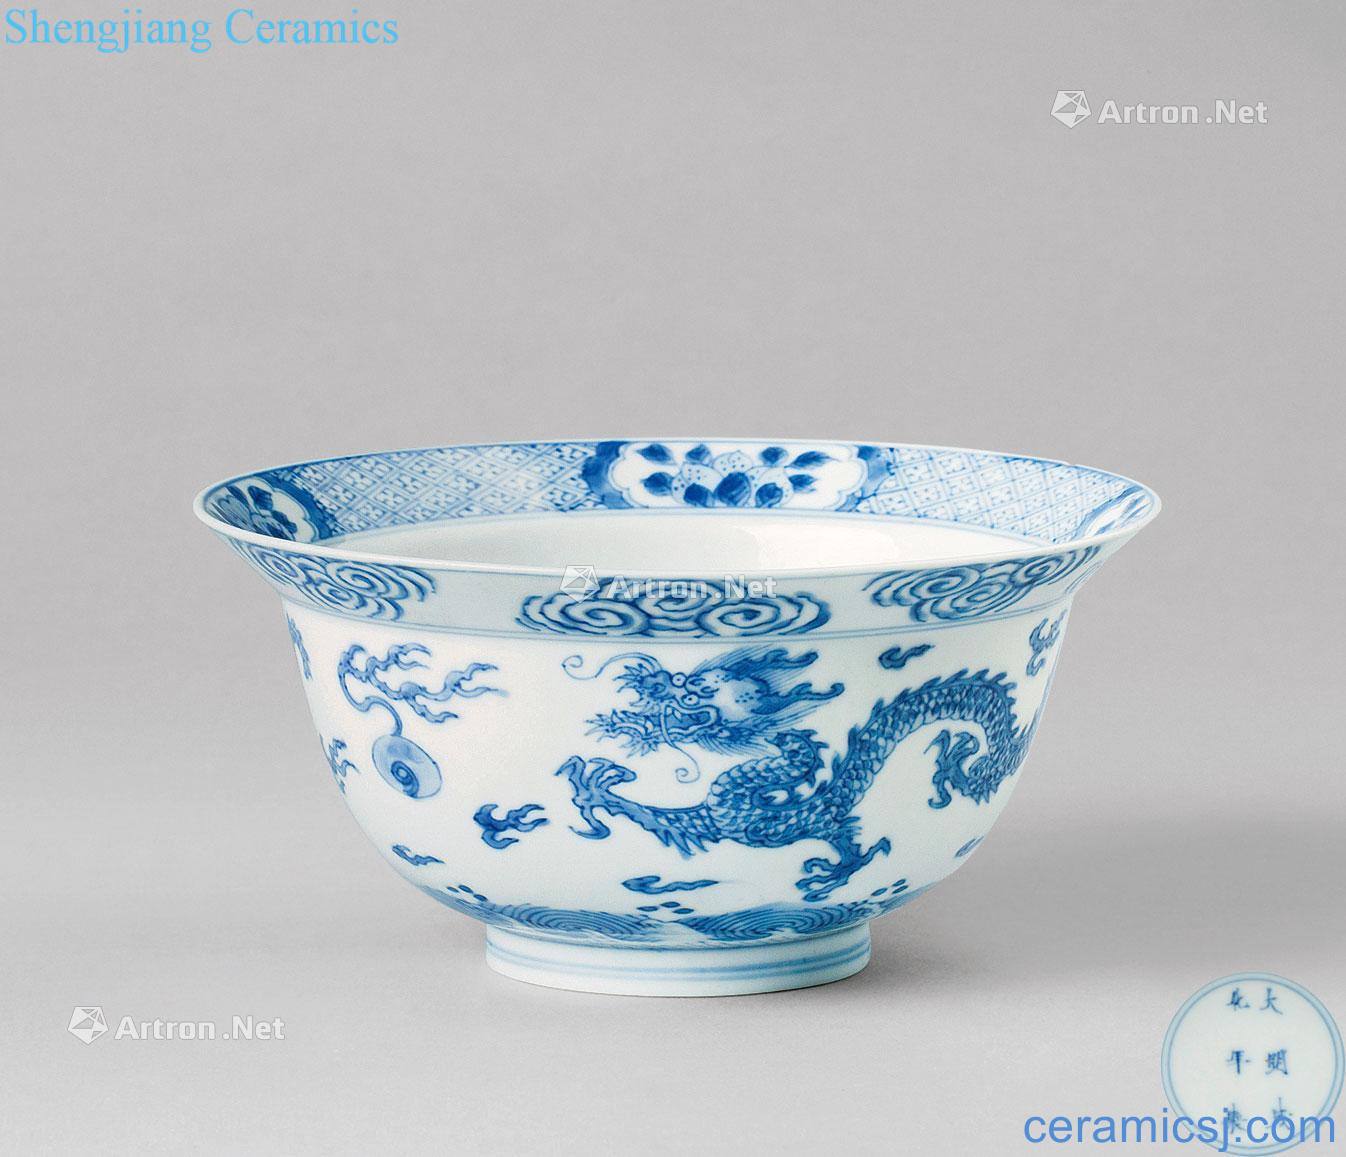 In the qing dynasty Blue and white praised wen mouth bowl